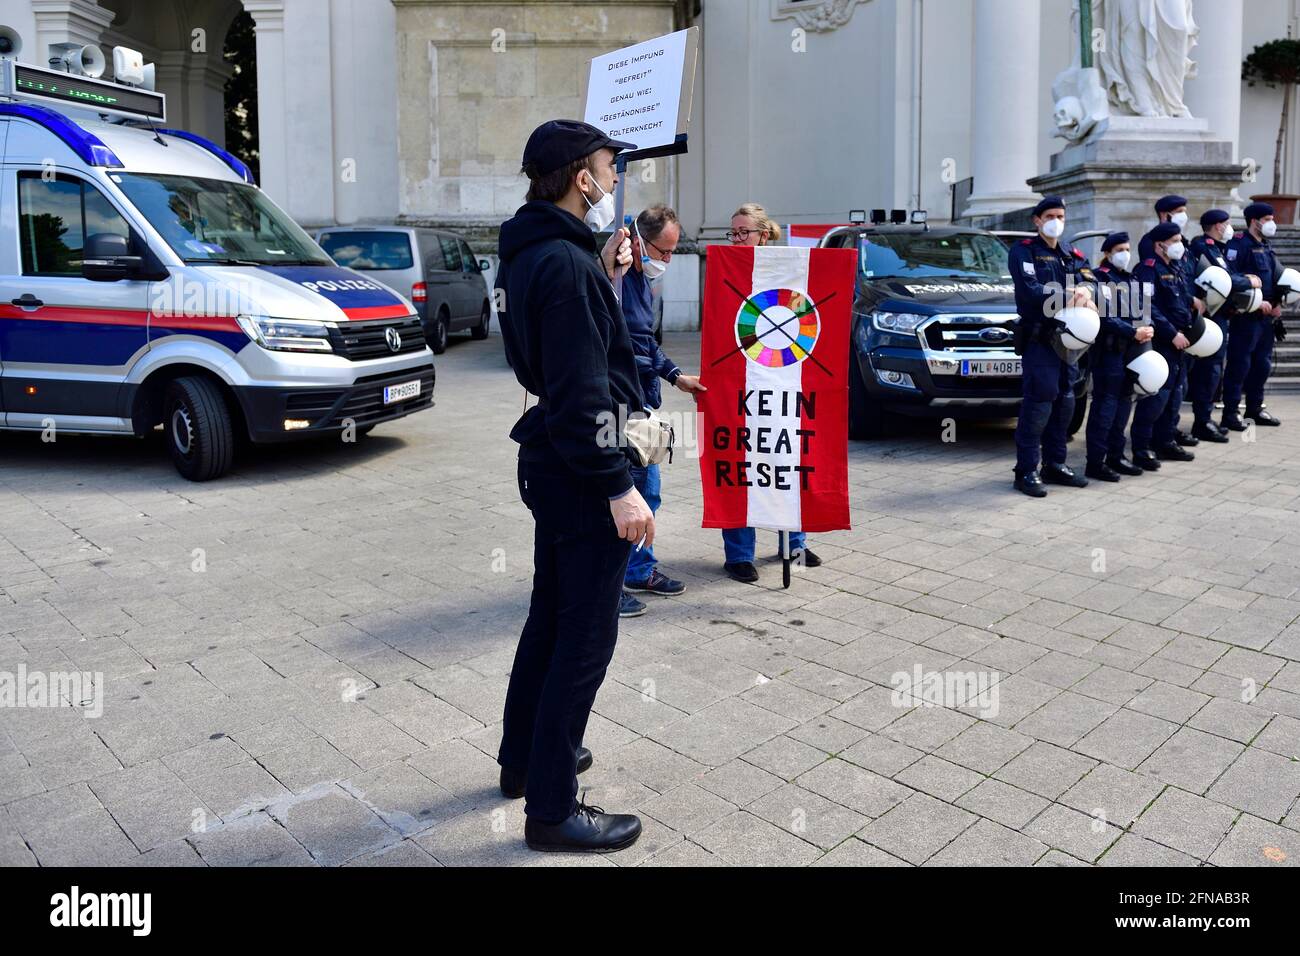 Vienna, Austria. 15th May, 2021. 40 meetings have been registered for today, including rallies against CoV measures. An unapproved anti-corona and anti-government demonstration  in Vienna in the city center. Flag with the inscription 'No Great Reset'. Stock Photo